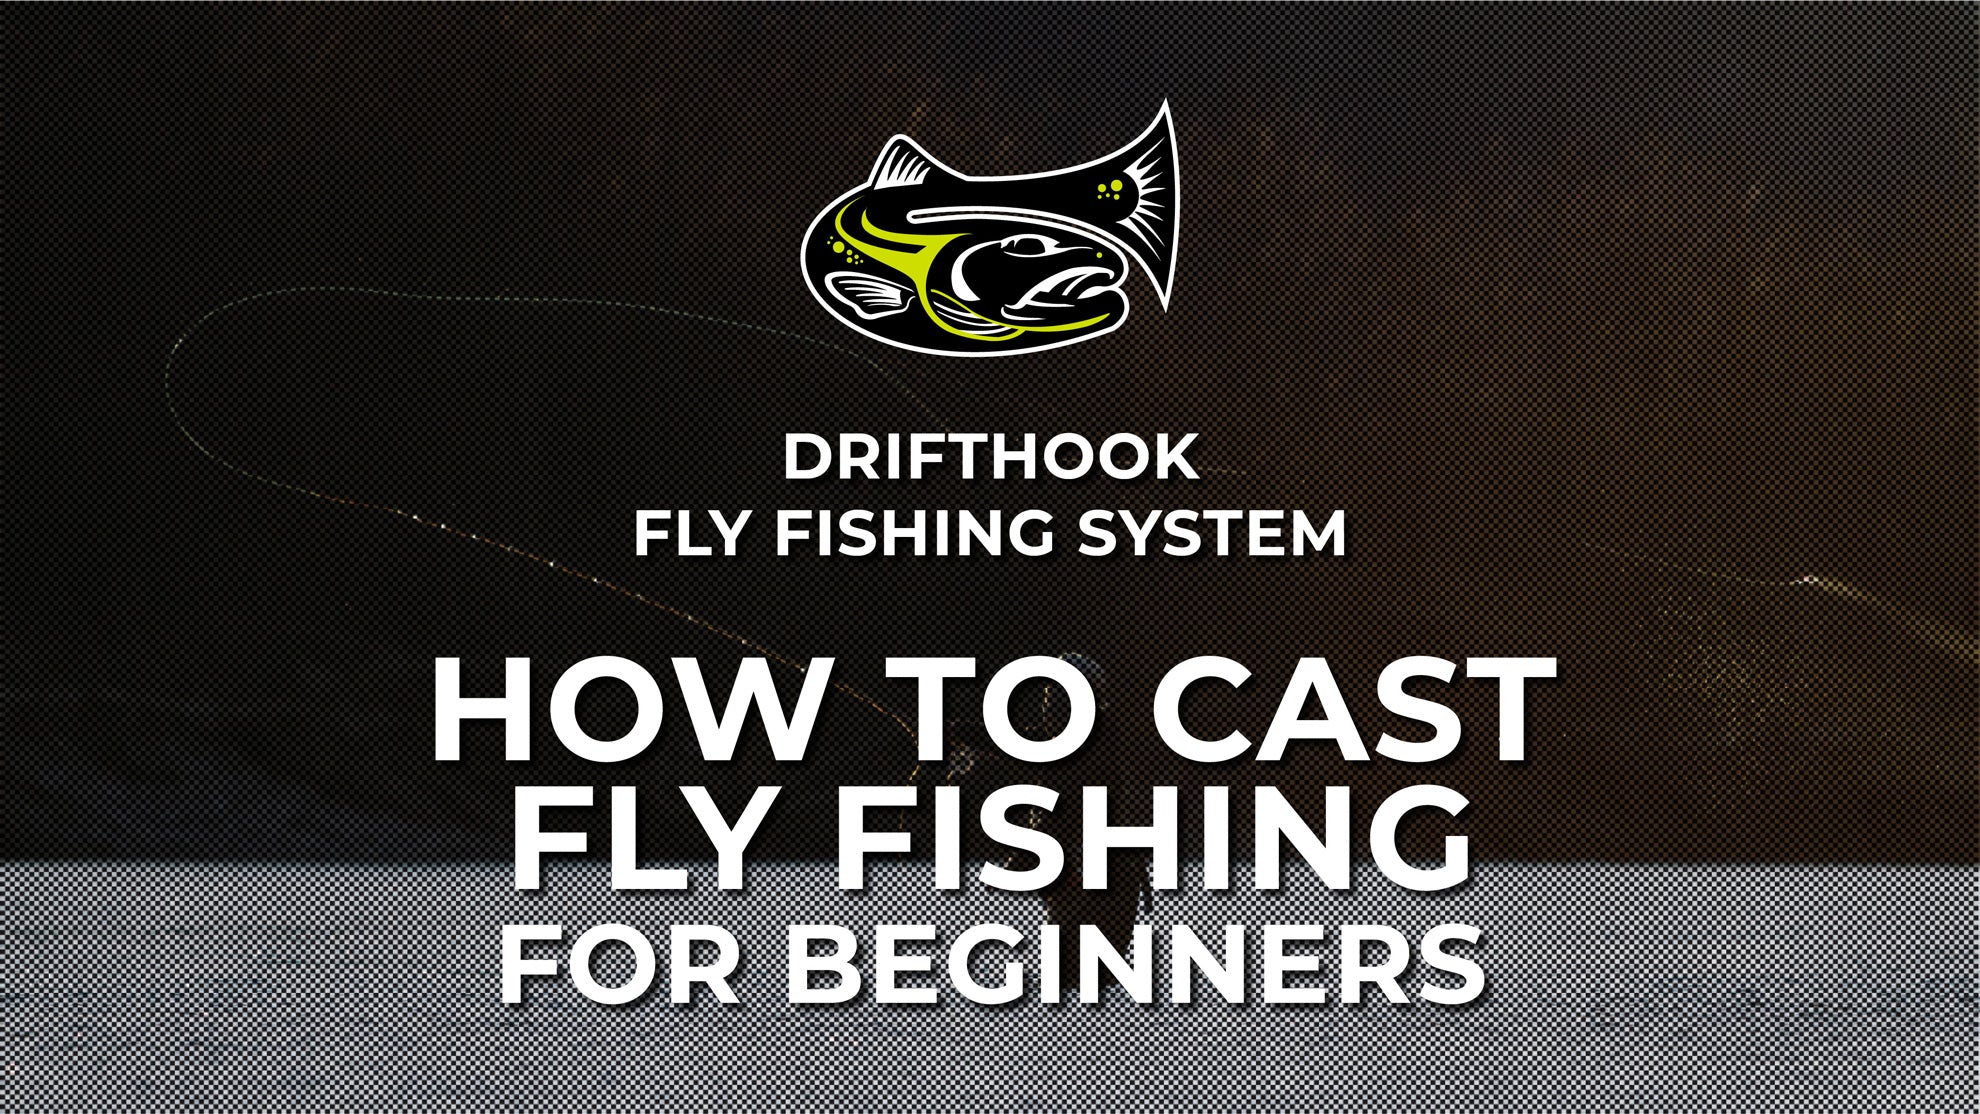 How To Cast Fly Fishing For Beginners